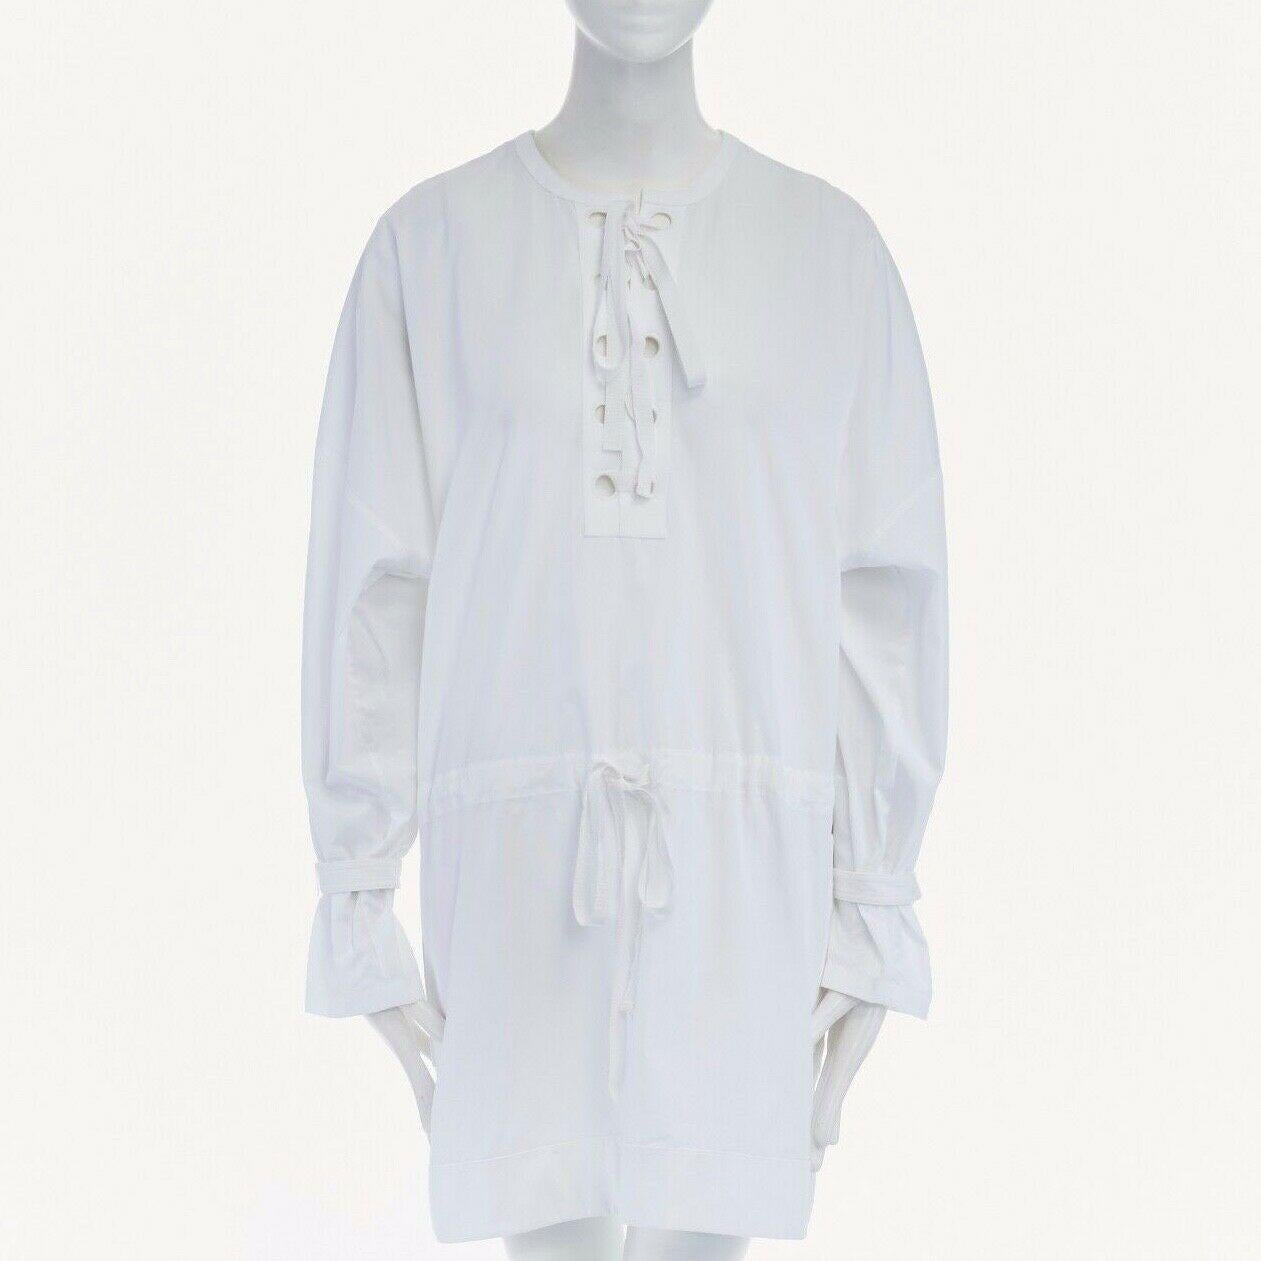 Gray new ALEXANDER MCQUEEN white cotton lace front tunic dress FR38 US8 UK10 M